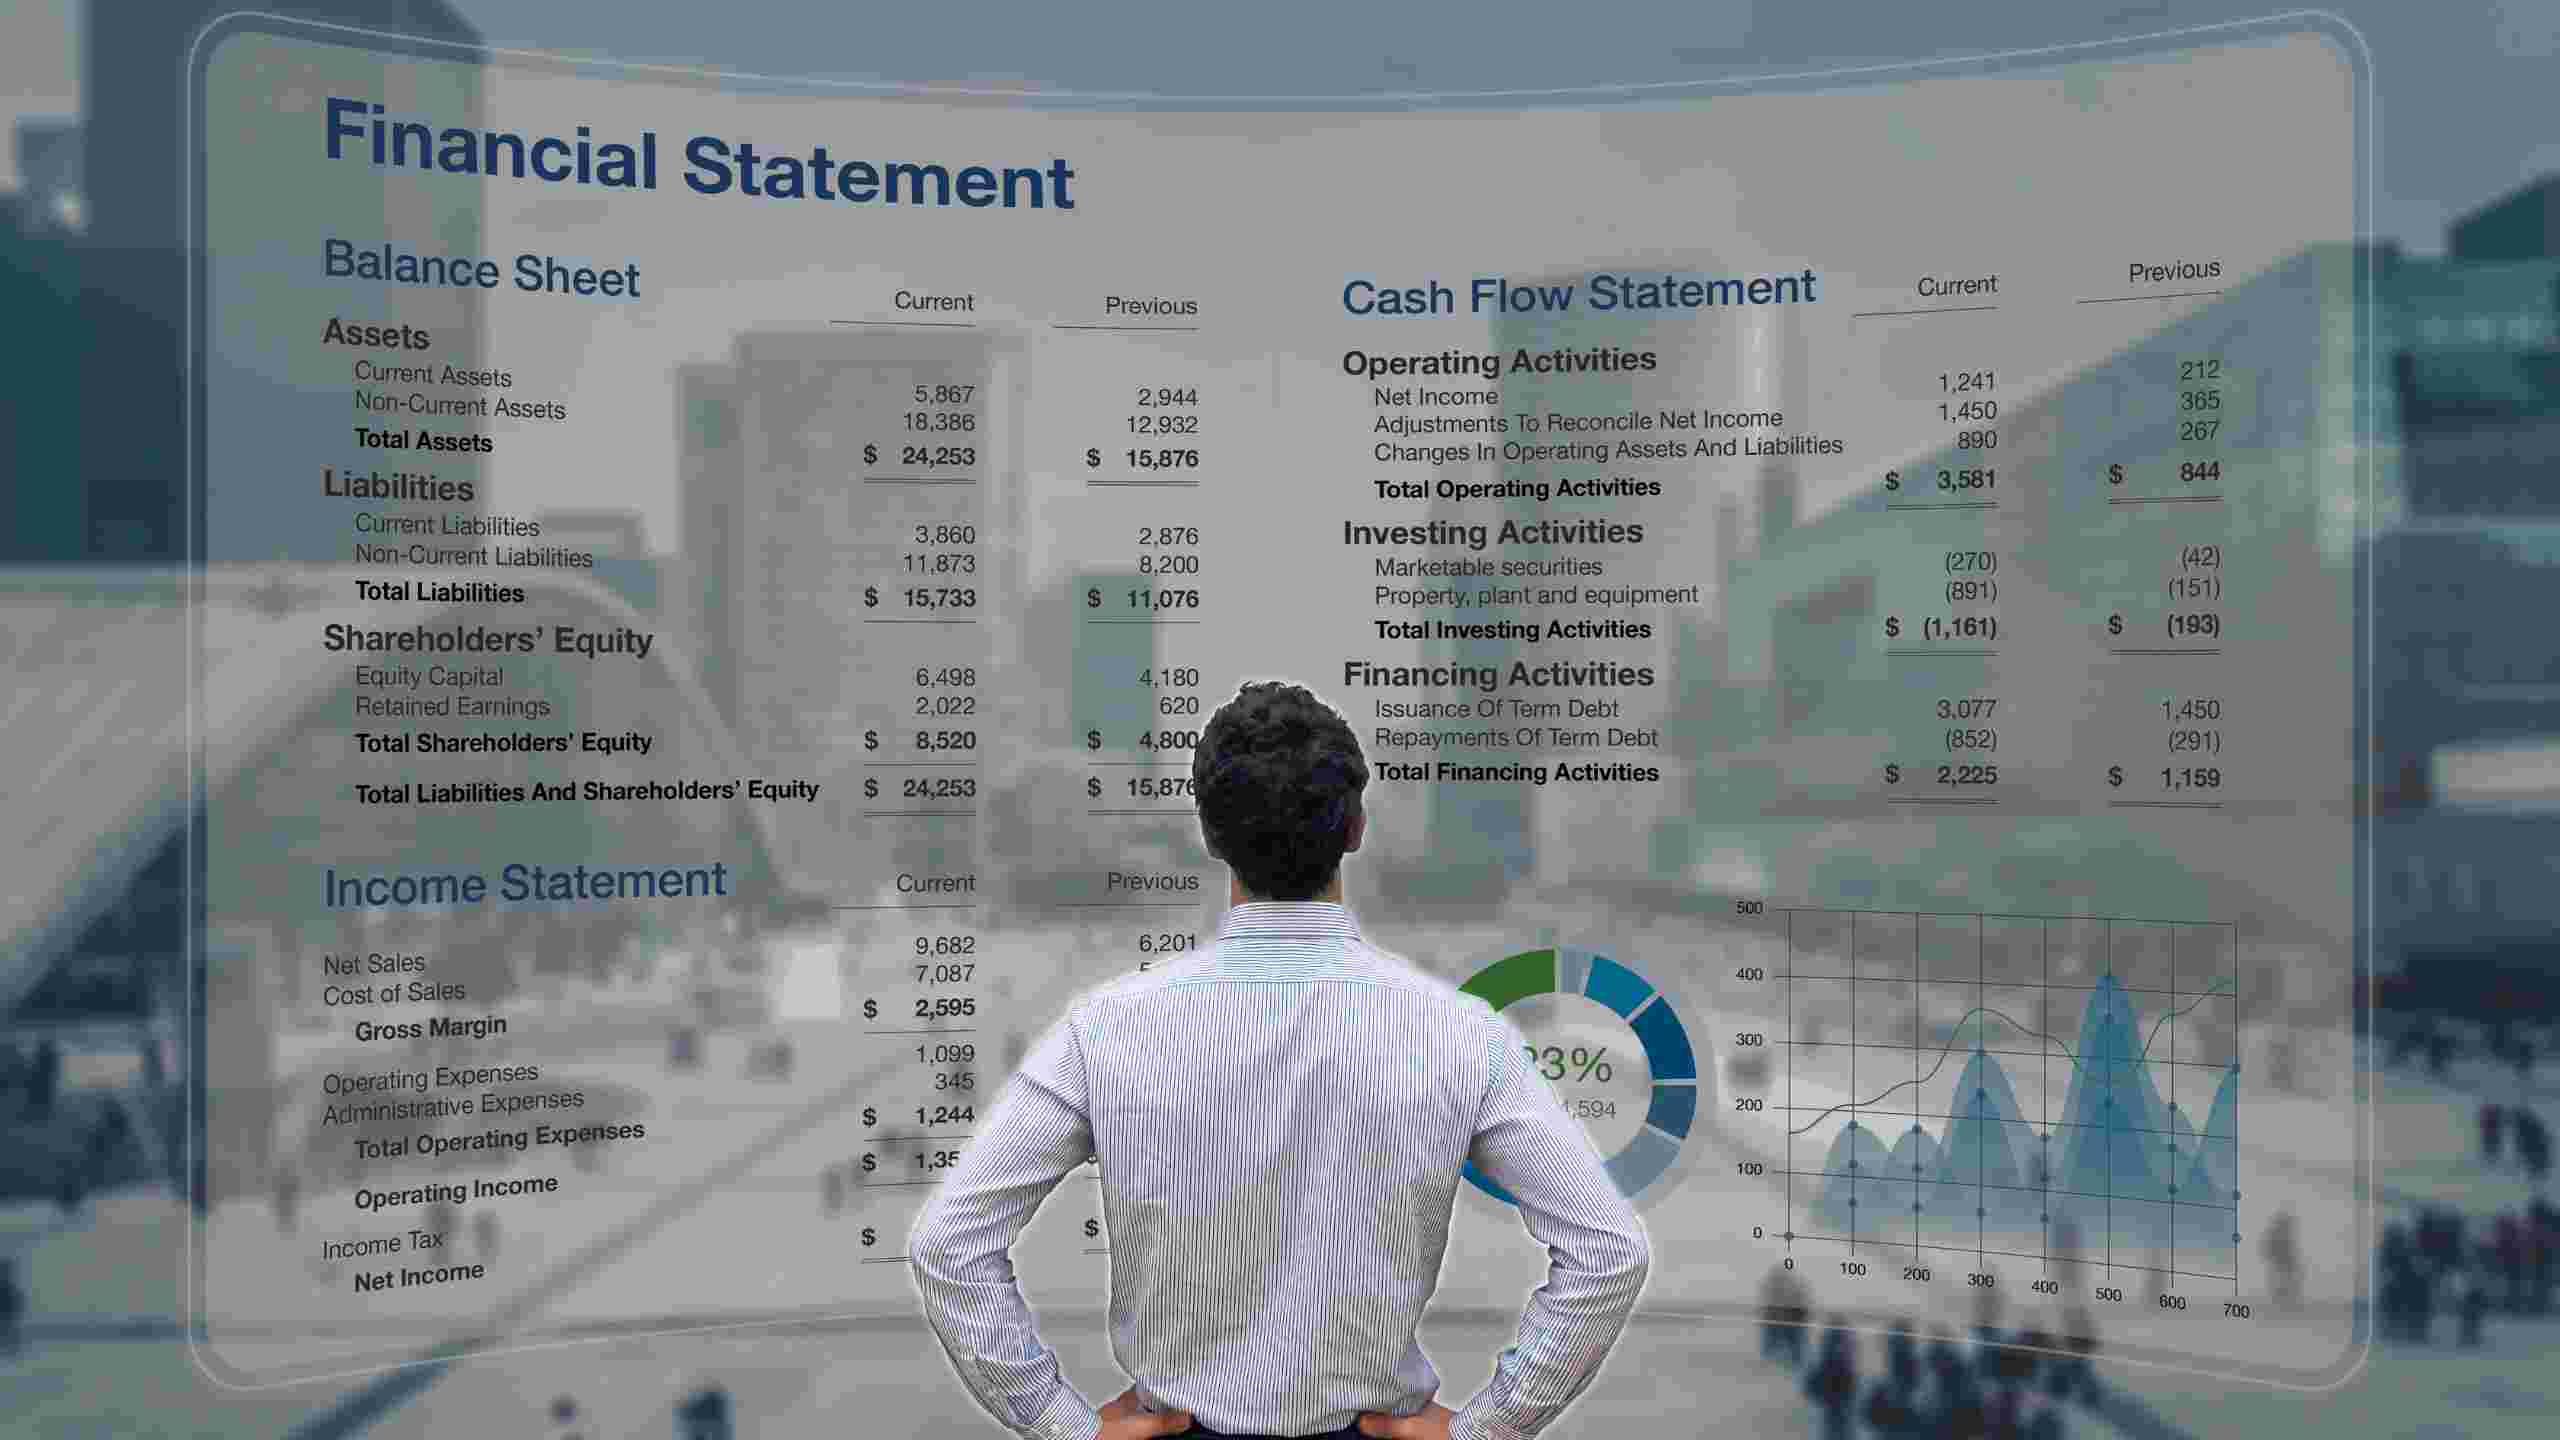 The CFO Guide Financial Statements